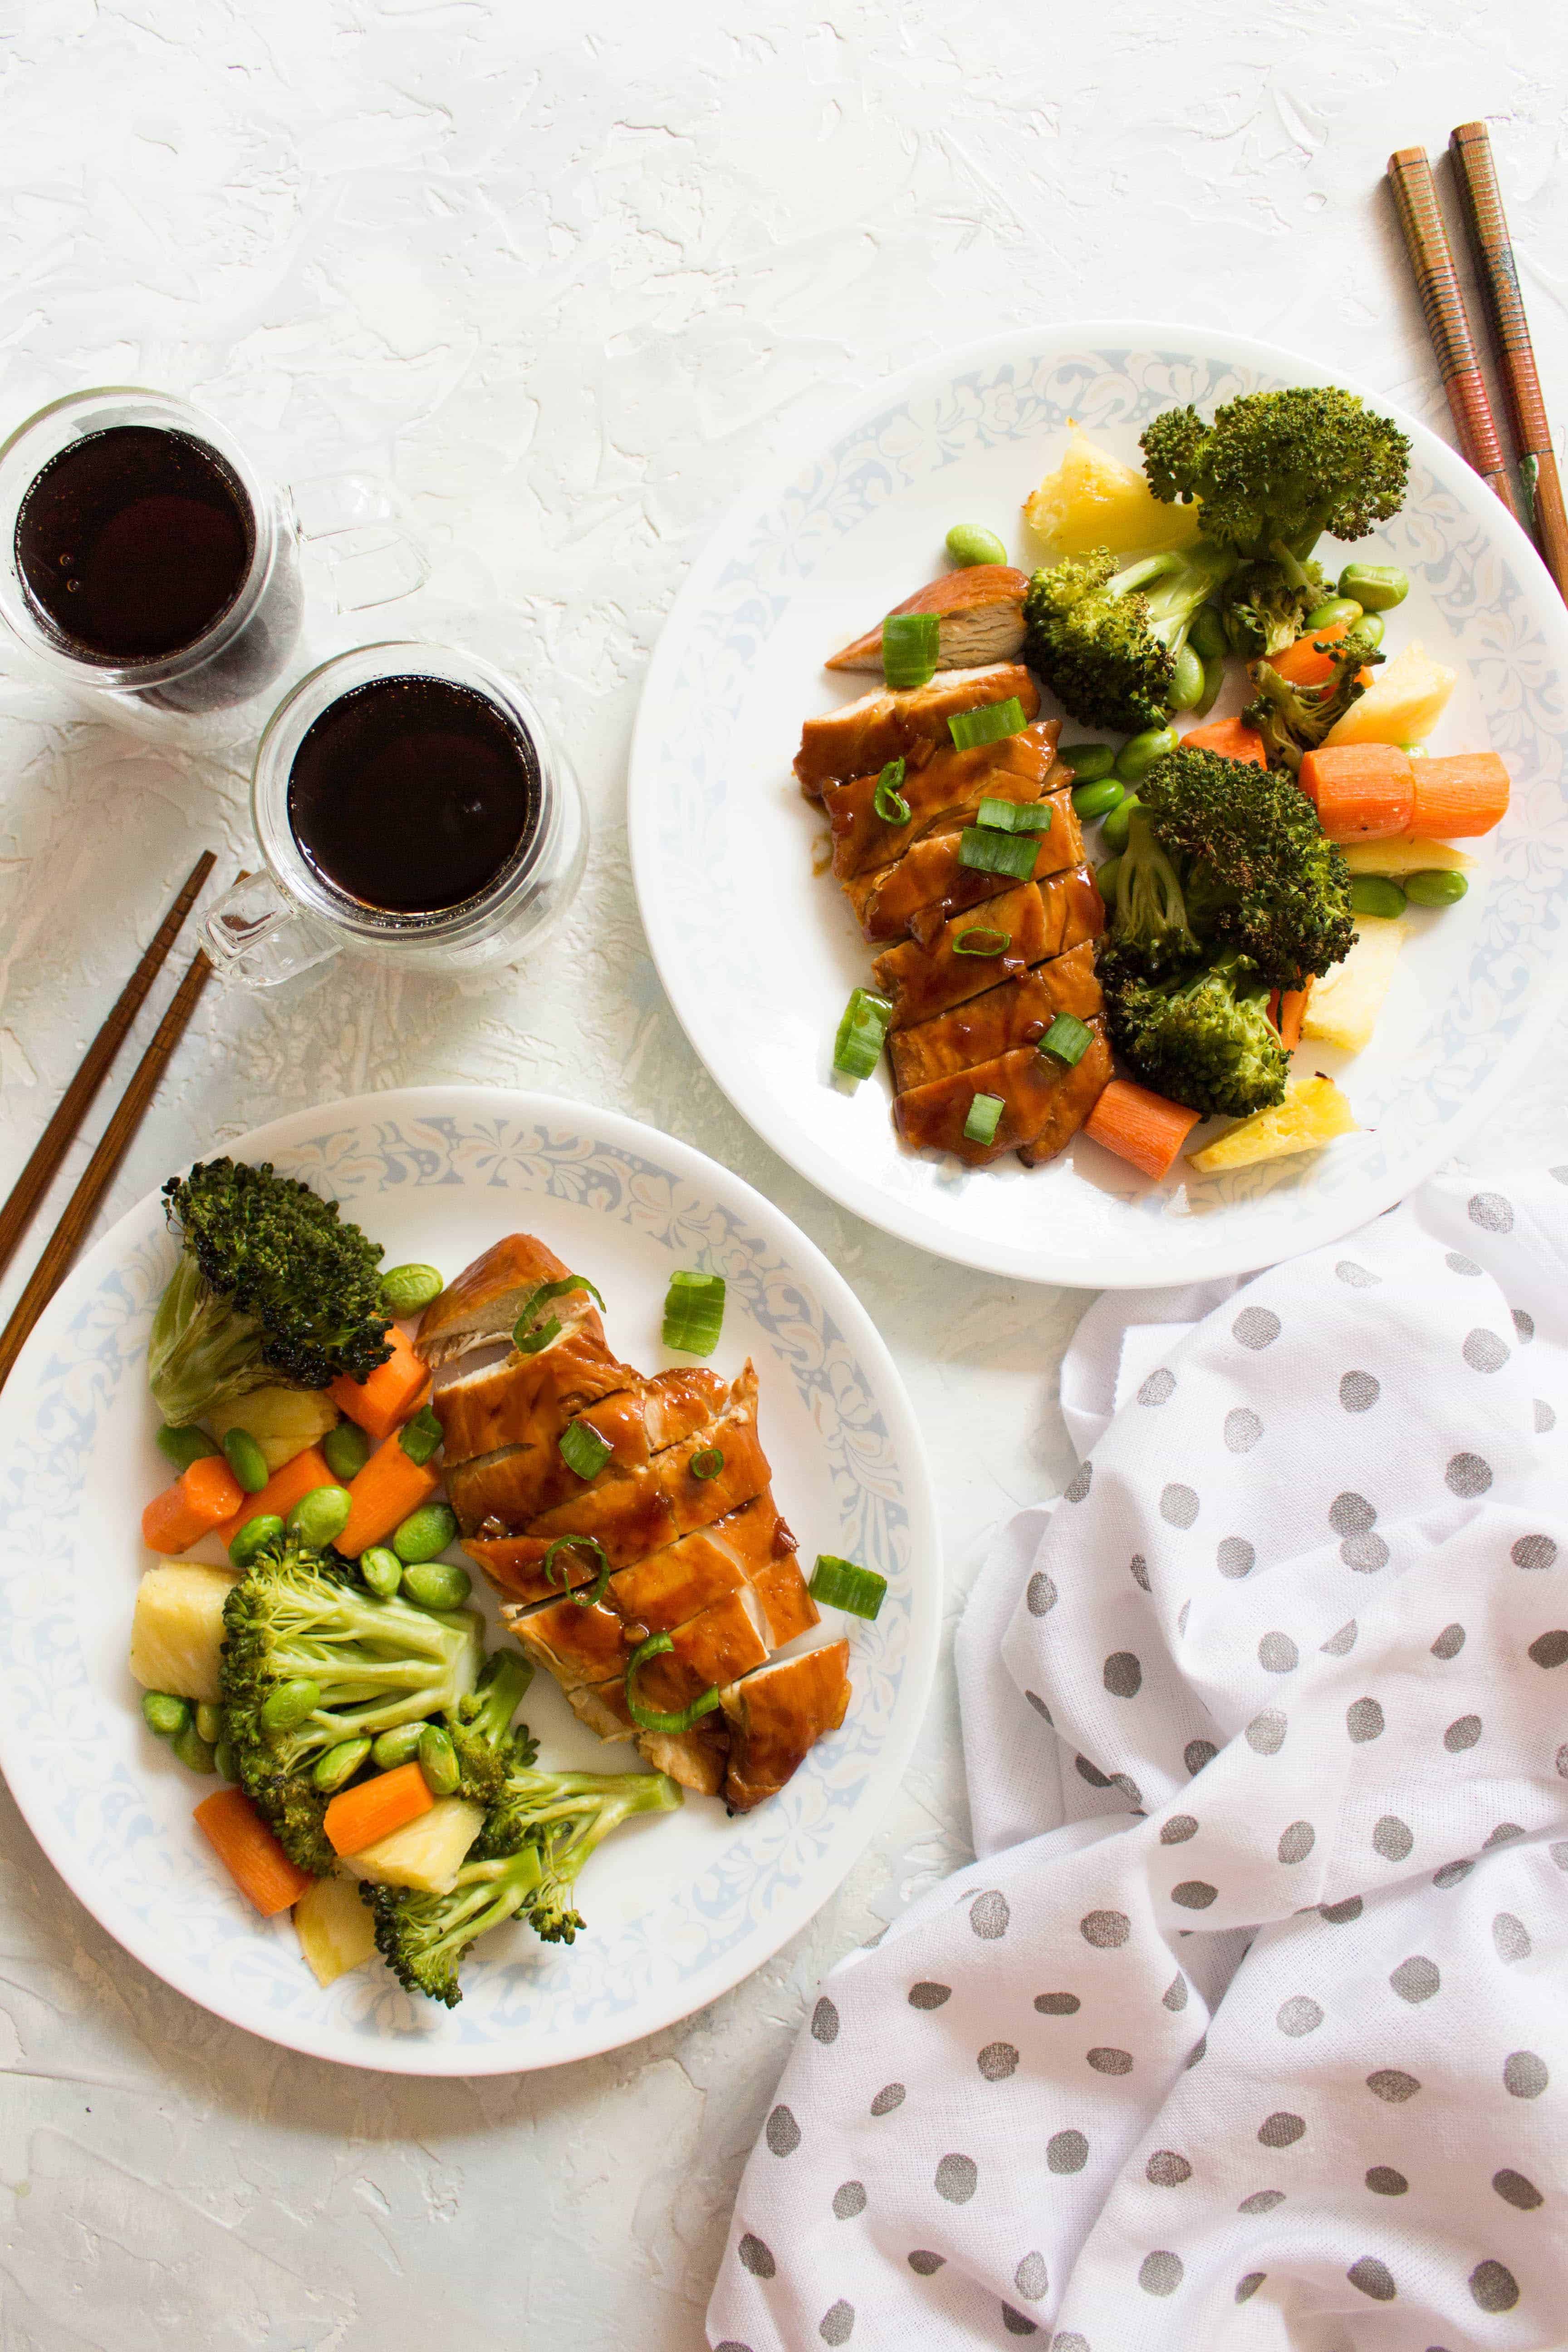 This Sheet Pan Chicken Teriyaki with Veggies and Pineapple Meal Prep (no sesame) is the healthier homemade version of the popular chicken teriyaki takeout! A pan of juicy chicken with a sweet and tangy sauce alongside roasted vegetables and pineapple!